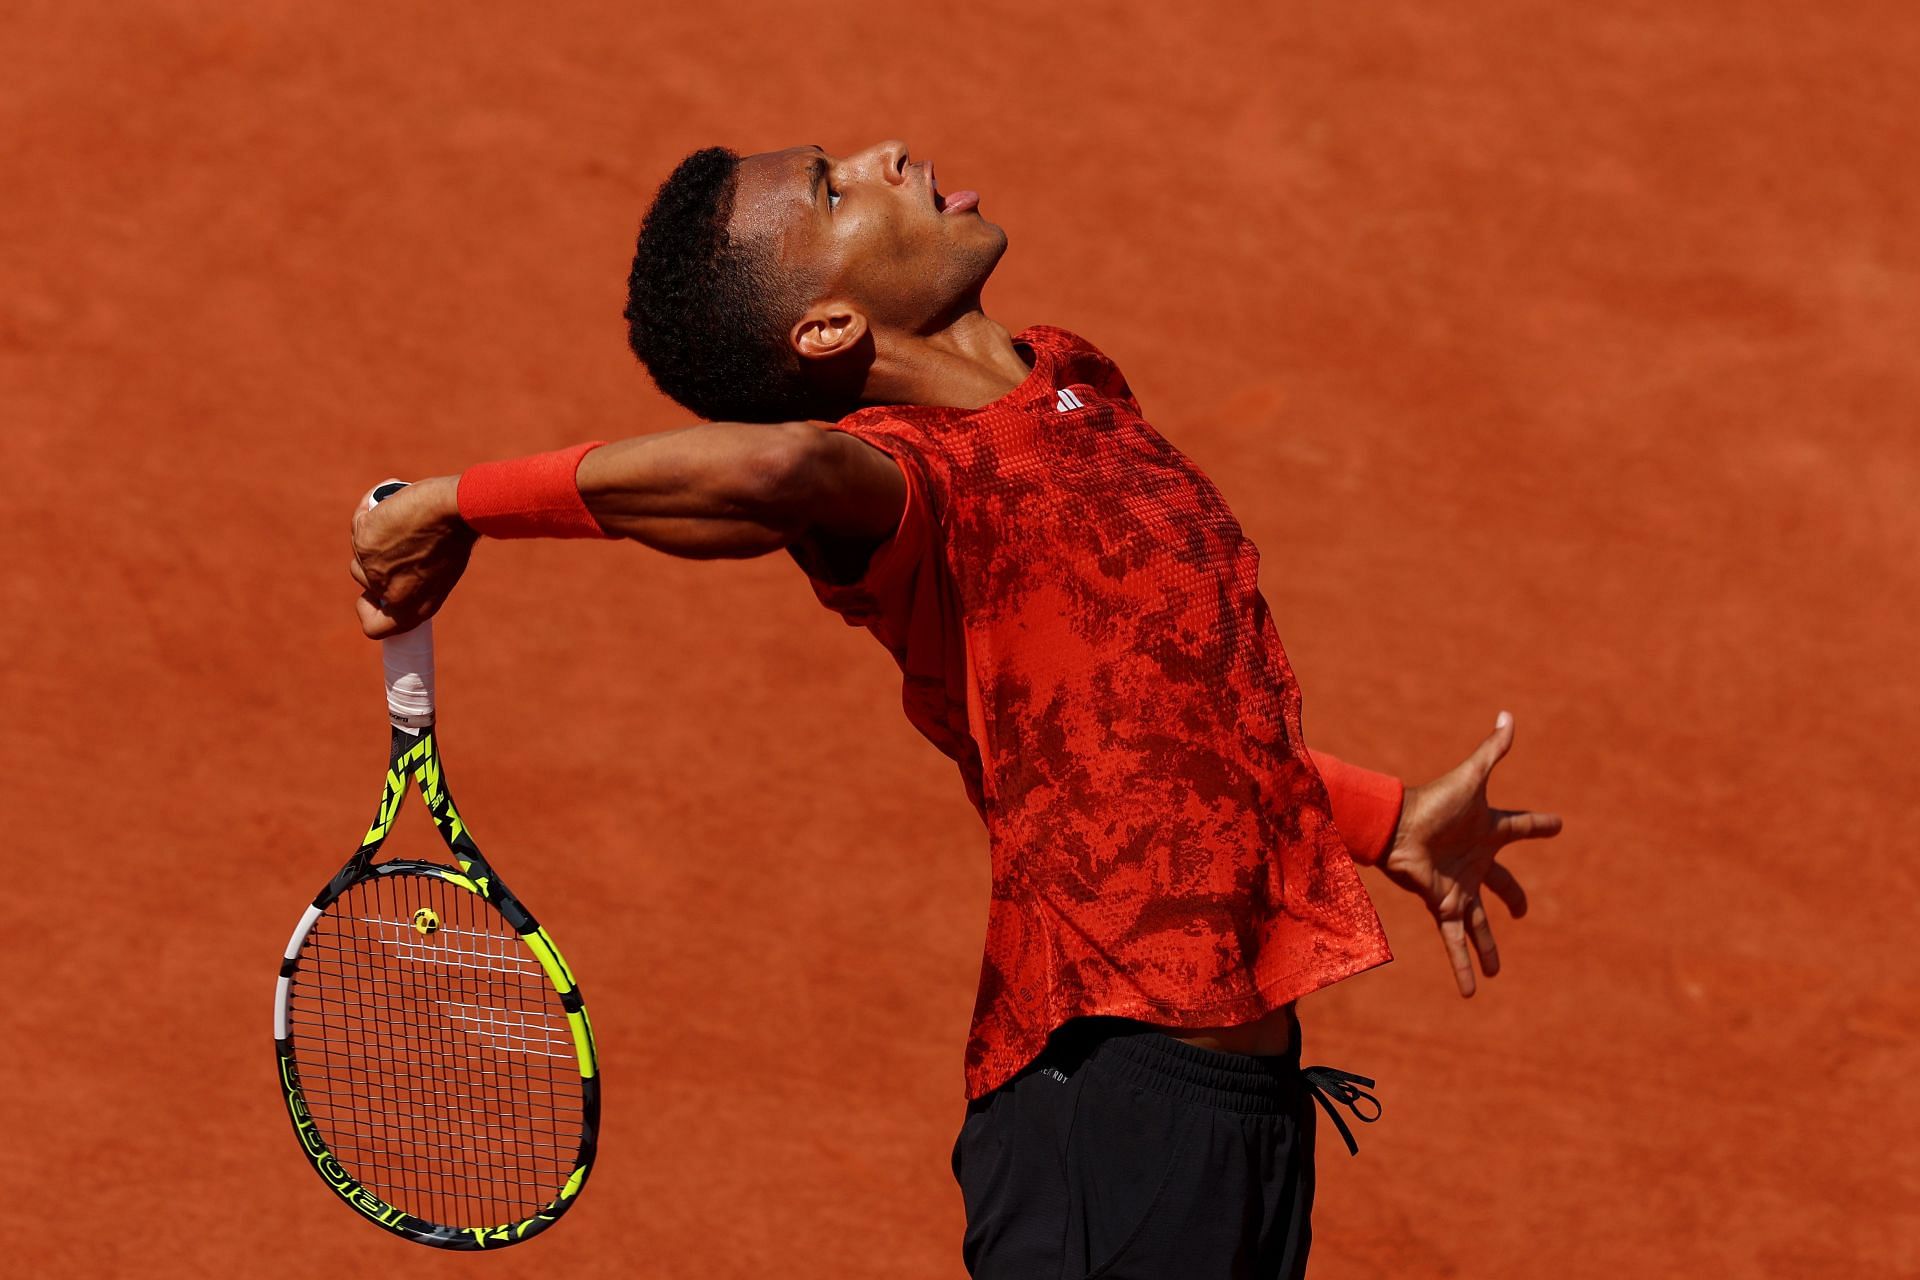 Felix Auger-Aliassime shockingly bowed out of the French Open in the first round